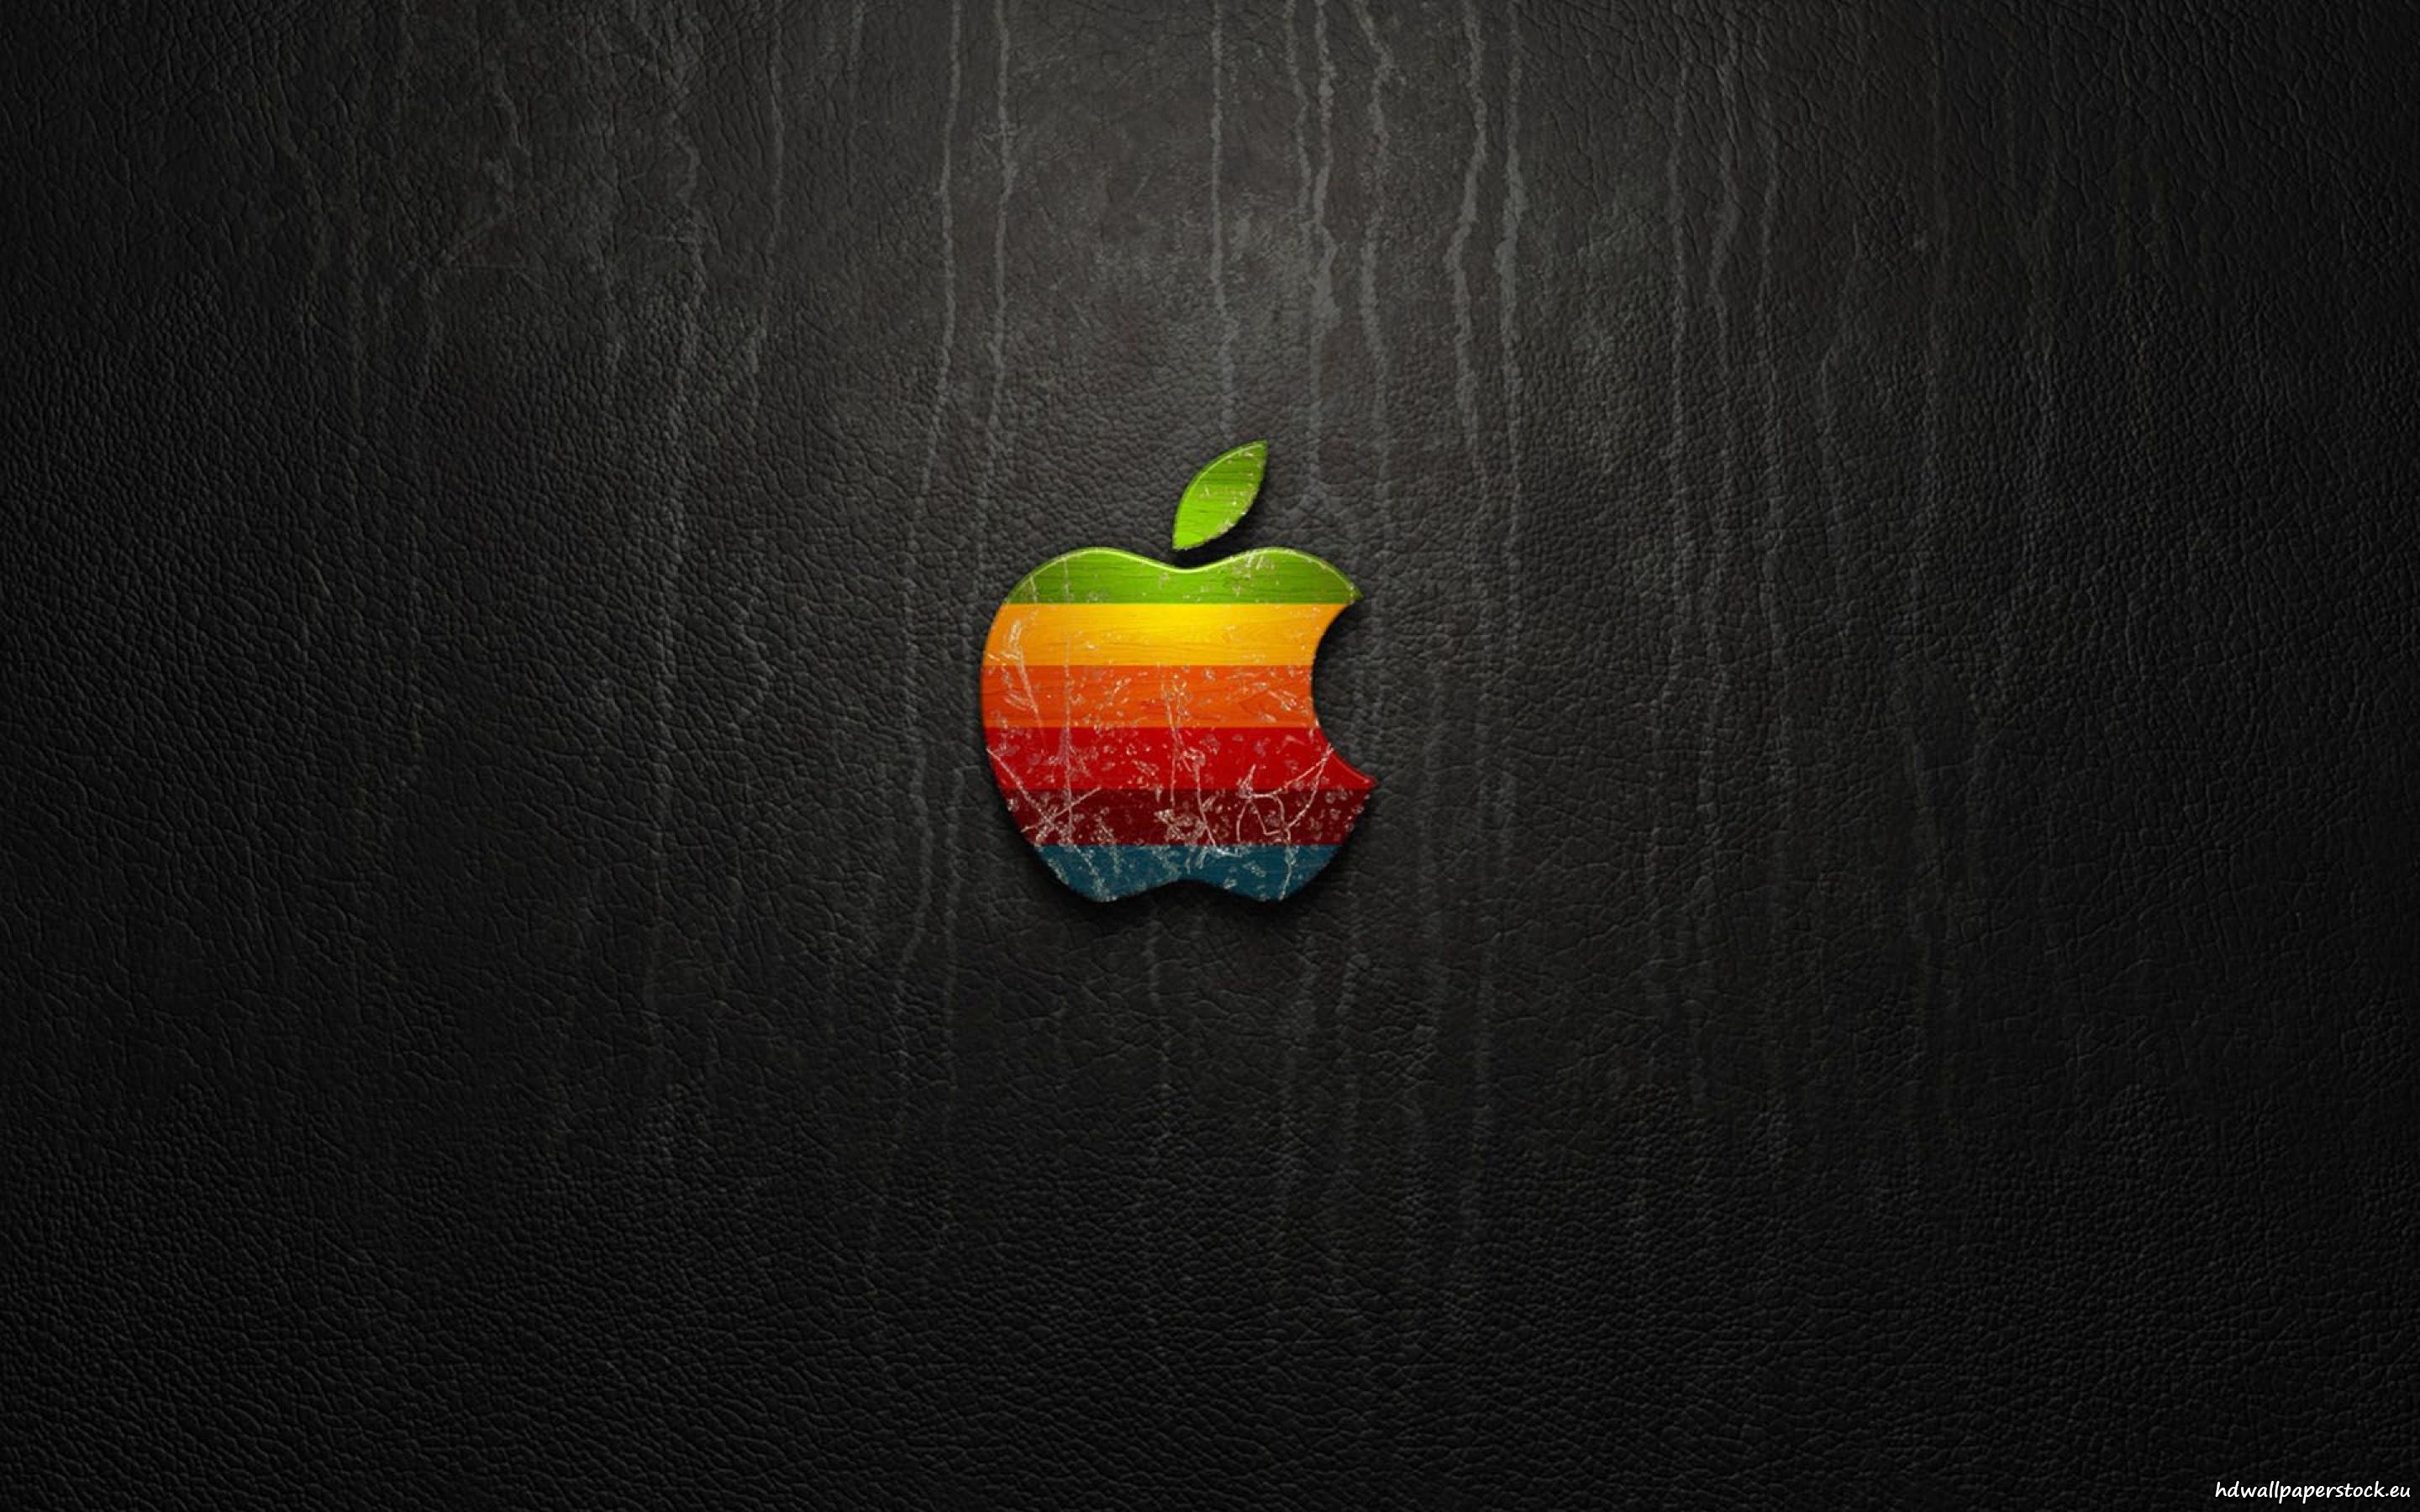 Hq Apple Wallpaper Full HD Pictures